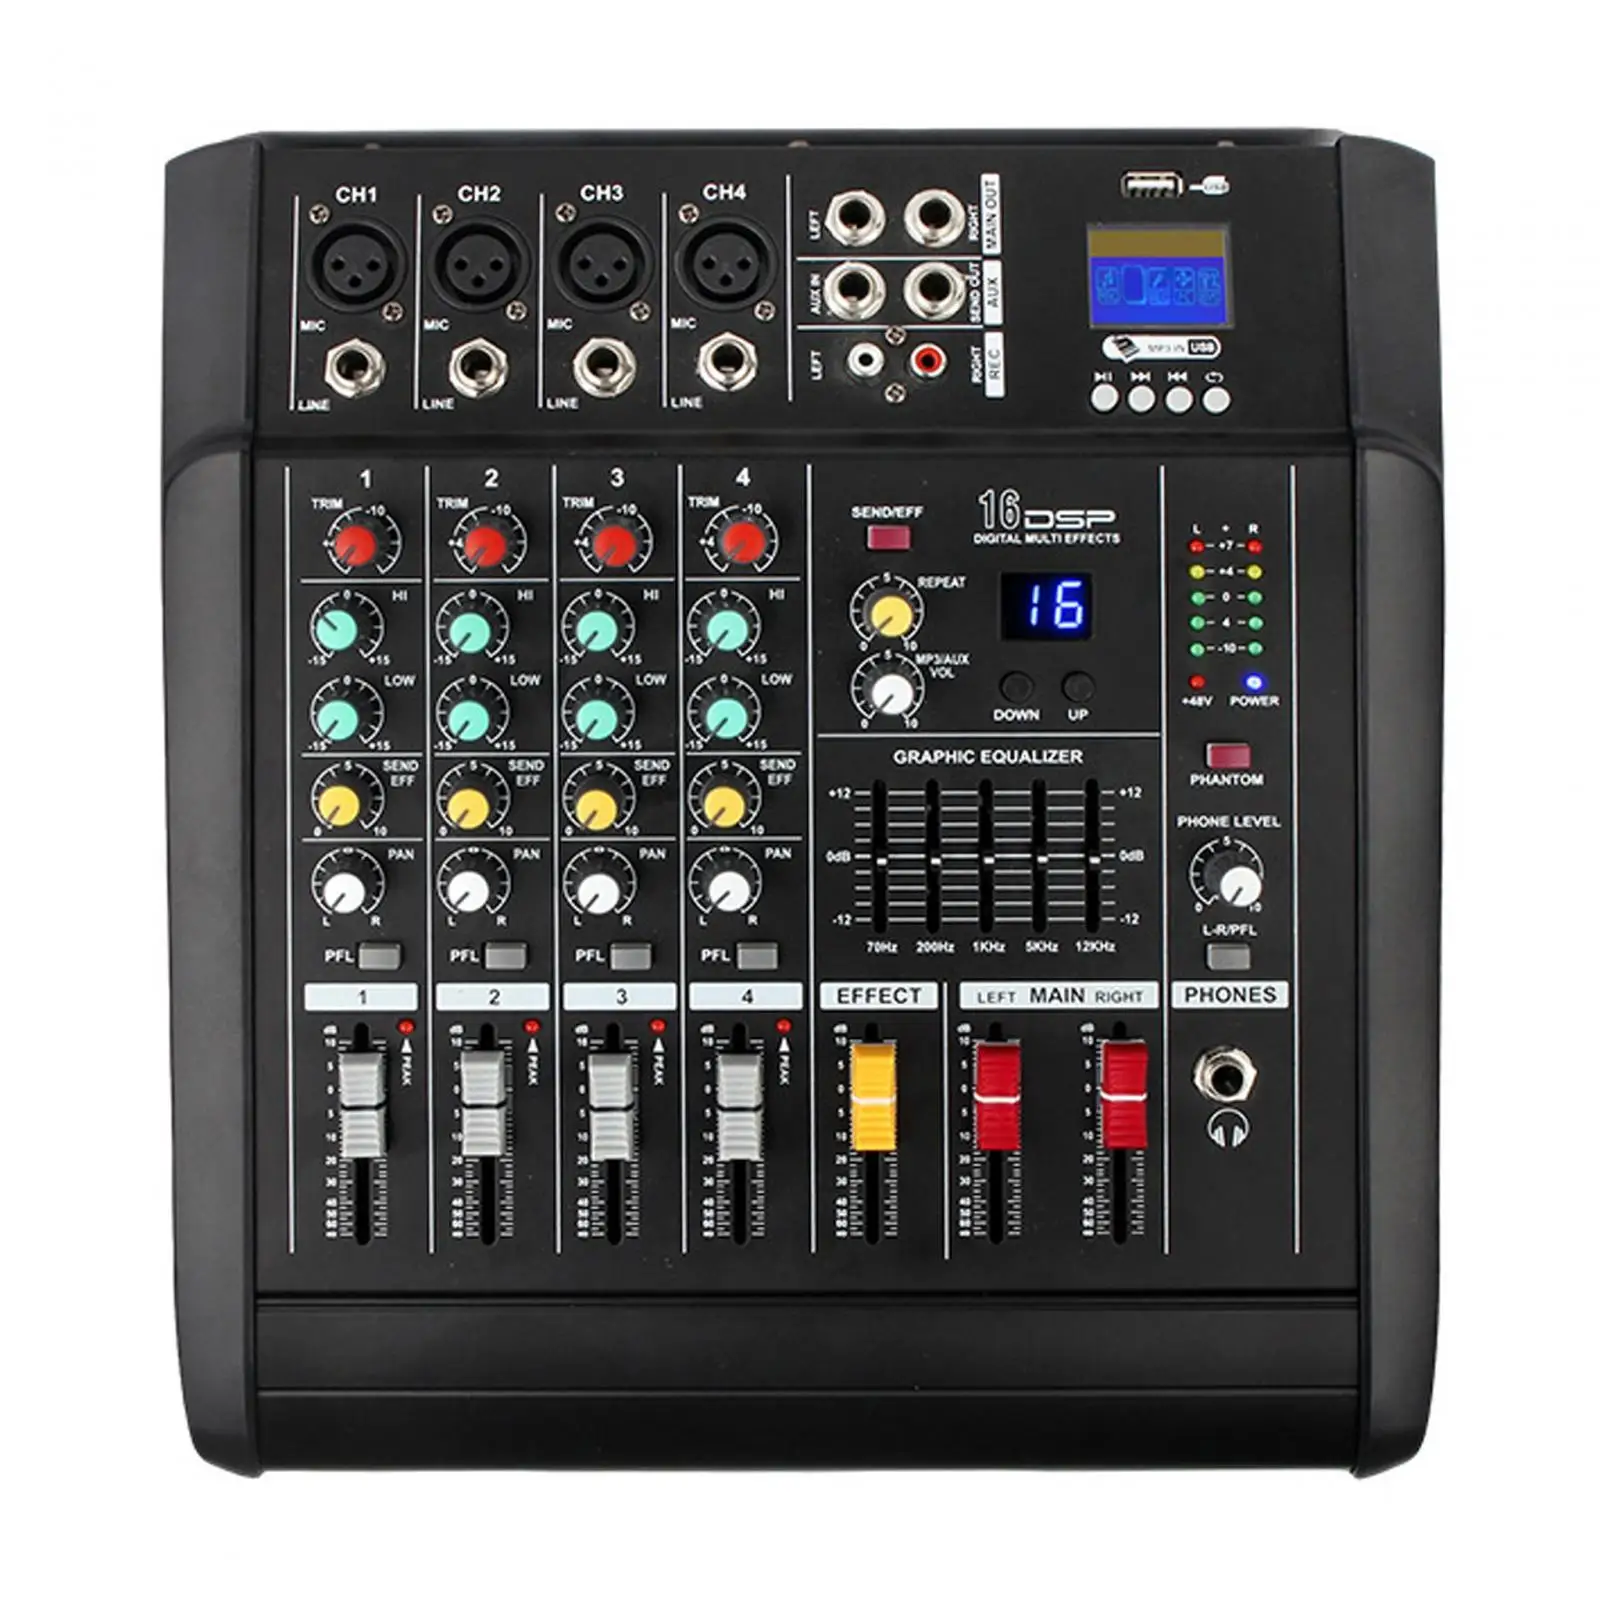 DJ Audio Mixer Amplifier USB Bluetooth 16 Bit DSP Effect DJ Mixer Mixing Console for Studio Performance Stage Party Recording